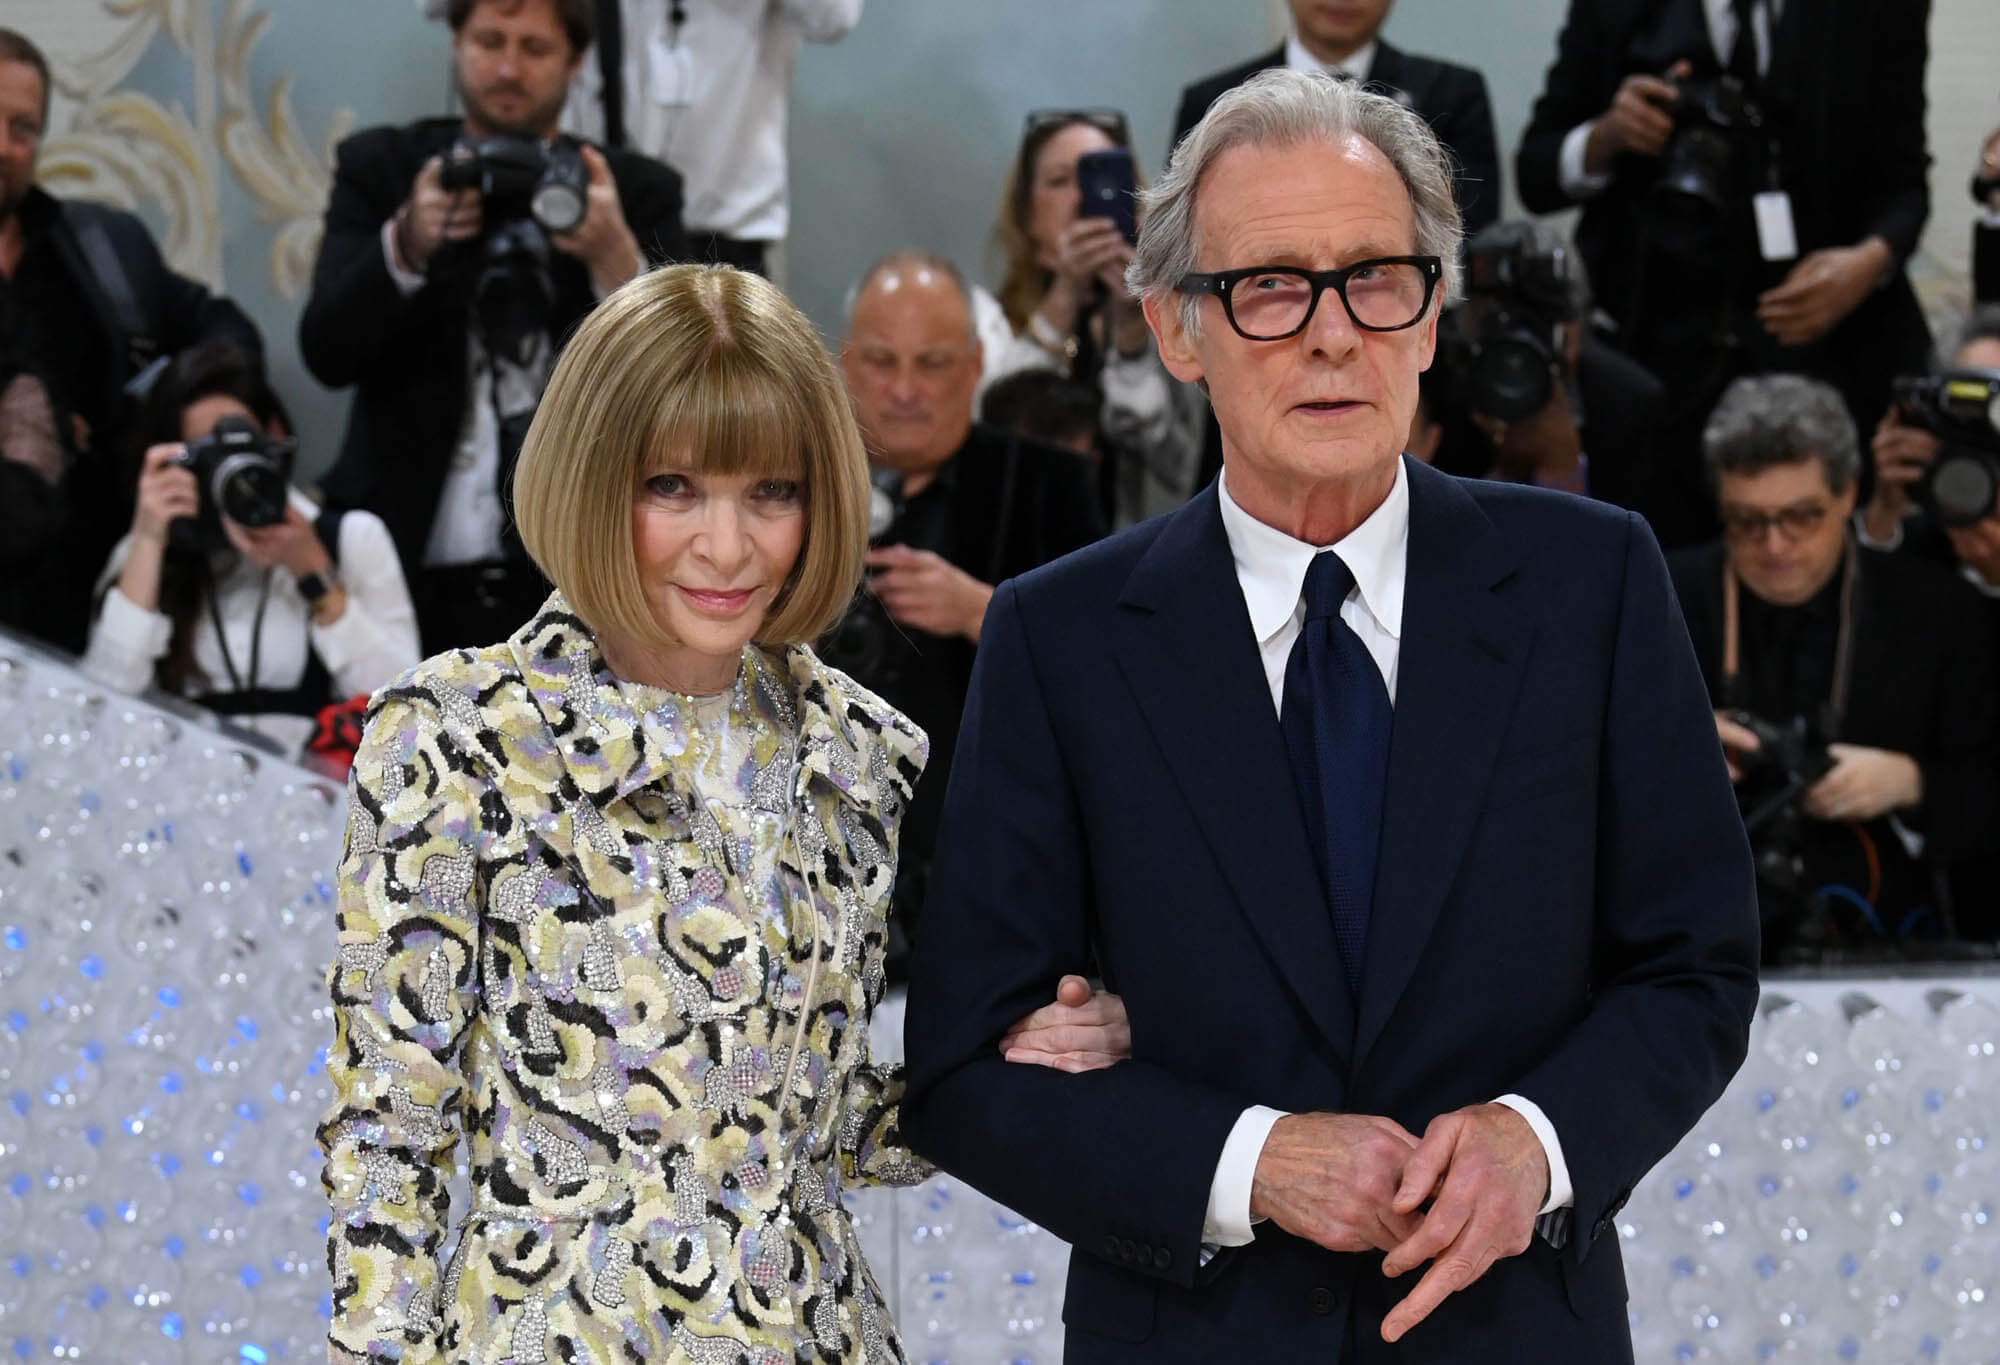 Are Anna Wintour and Bill Nighy just friends?